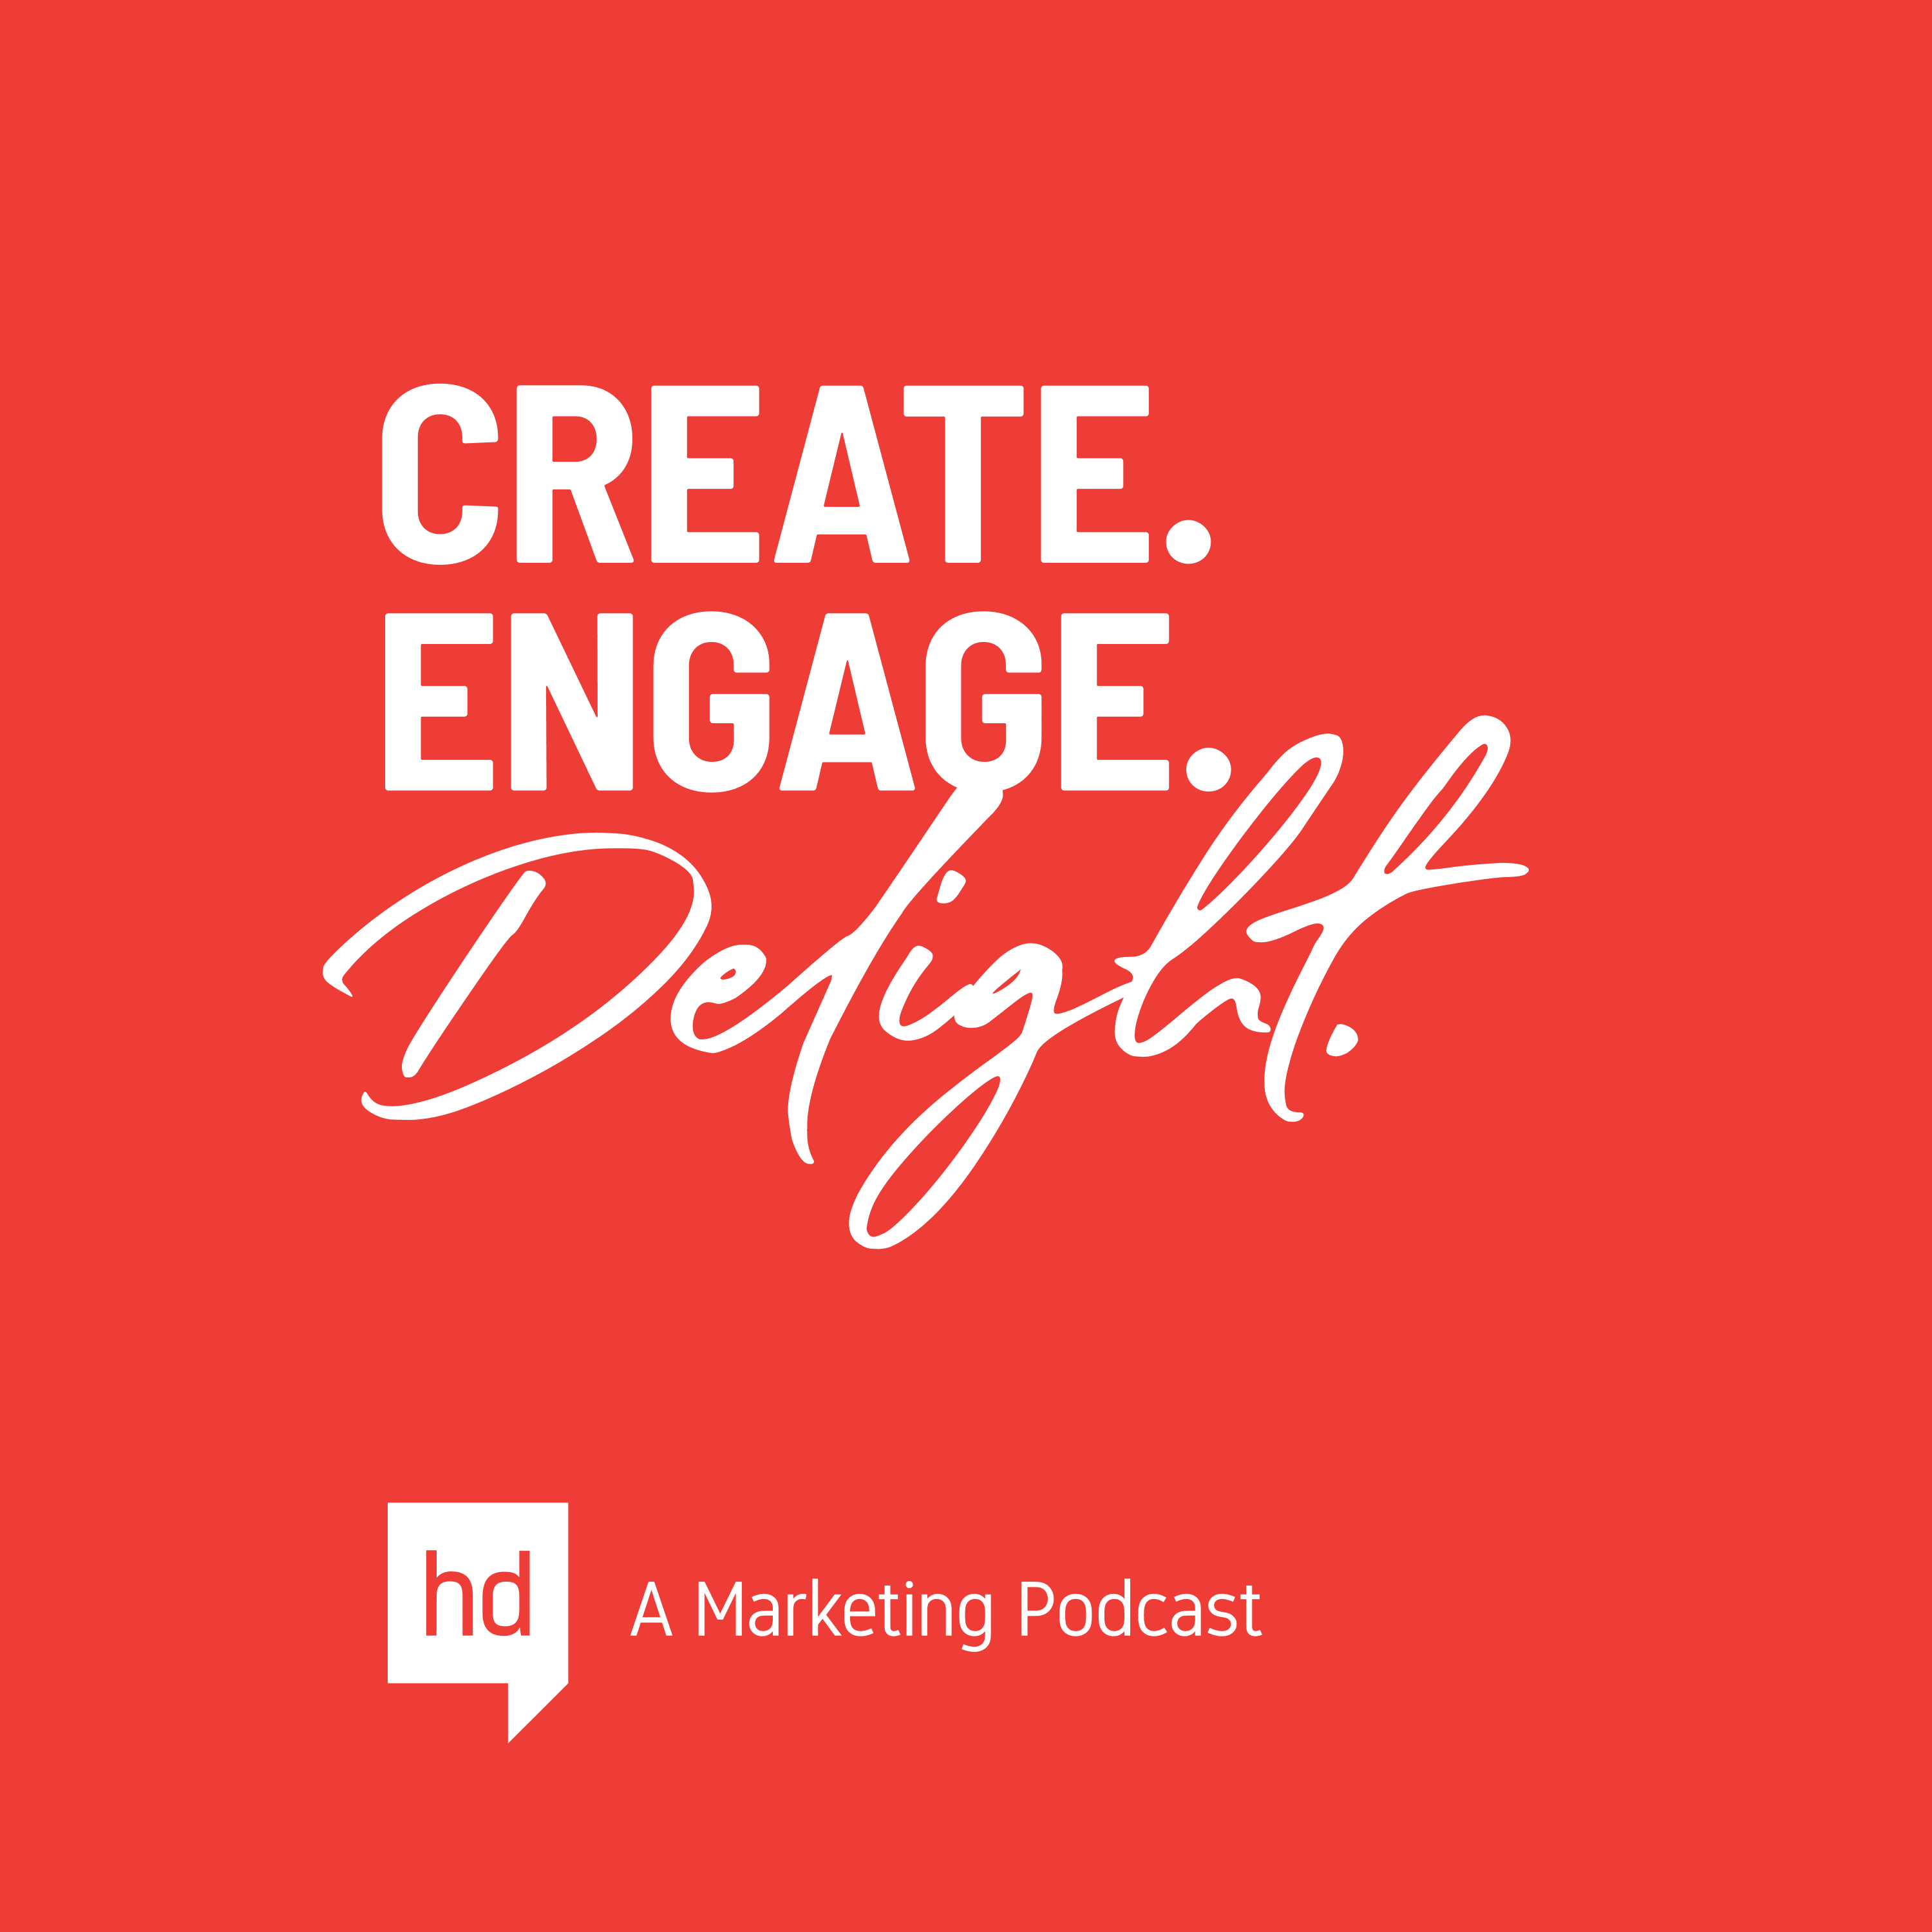 Create. Engage. Delight. A podcast by Hart Design.